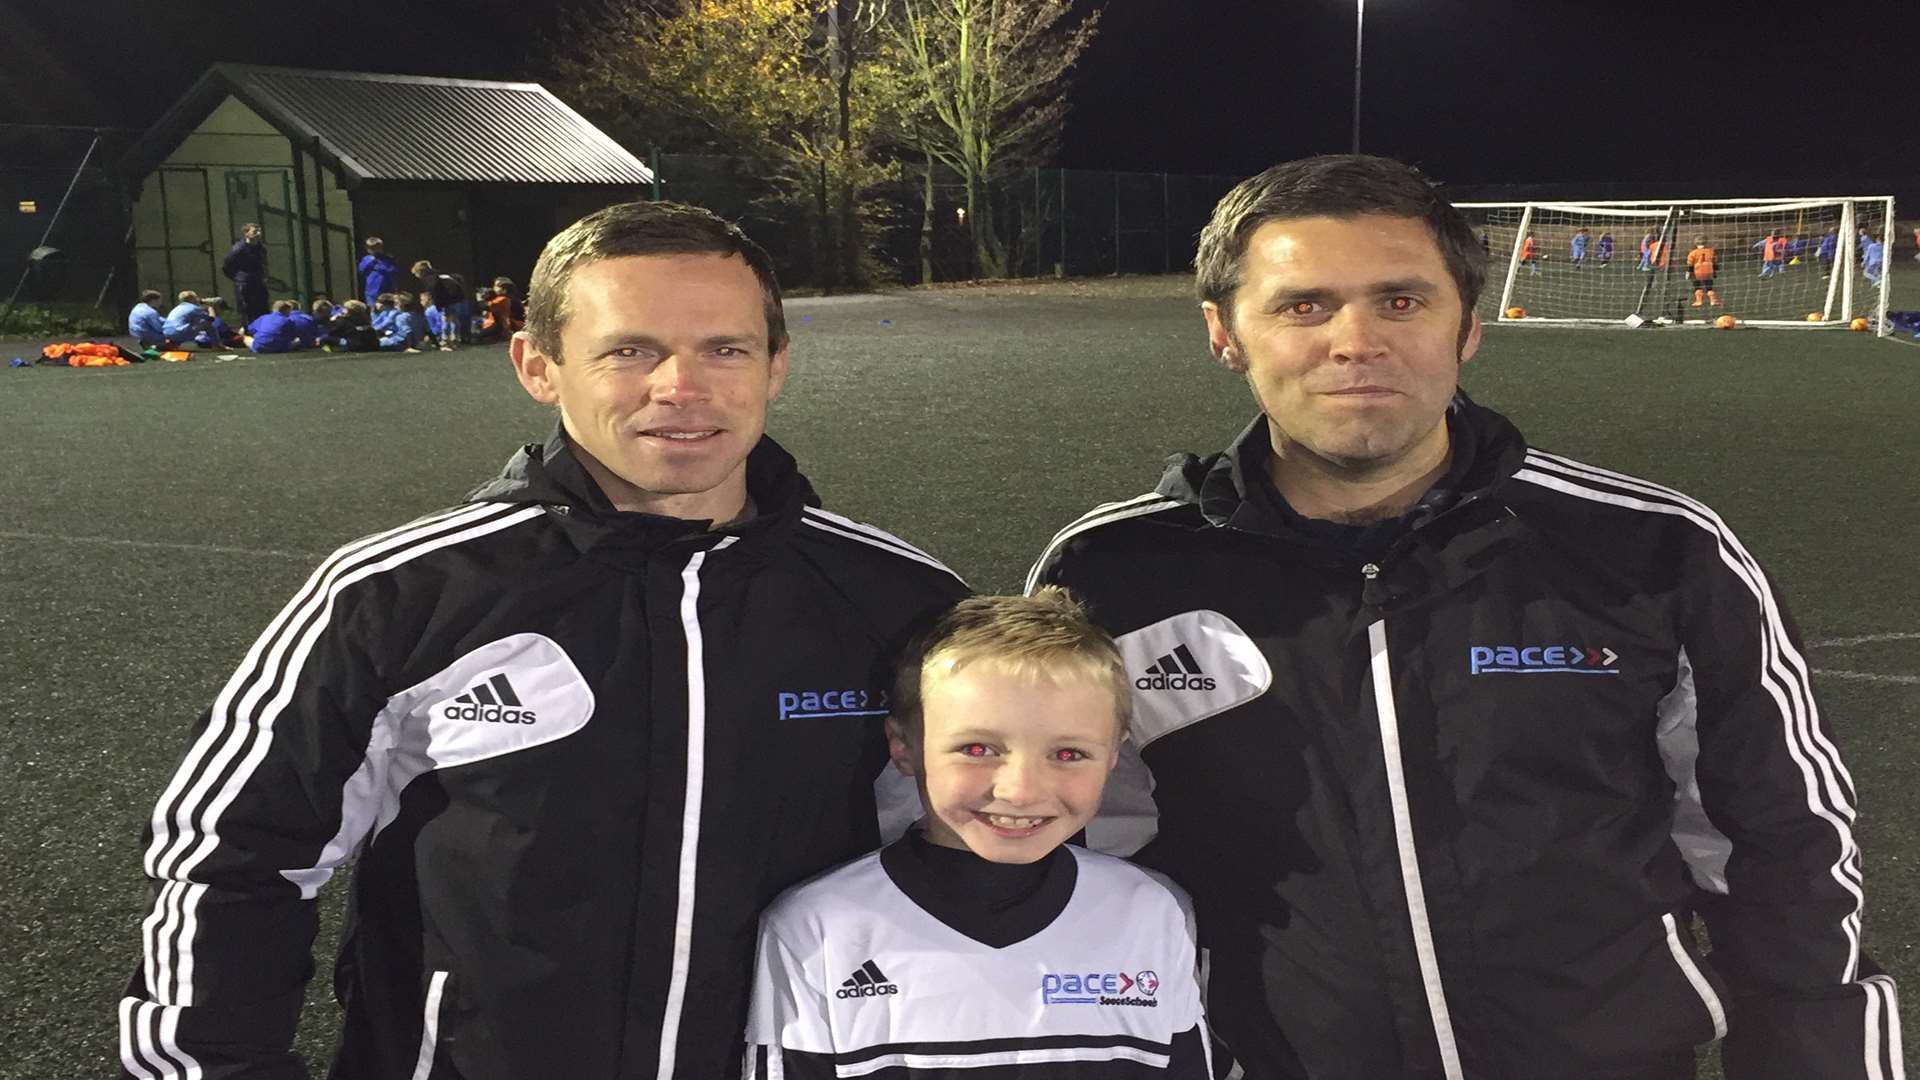 Ricky Owen (left) and Pat Sutcliffe, directors at the Pace Academy and Pace Soccer Schools with Josh Bayliss, who has been signed for Gillingham